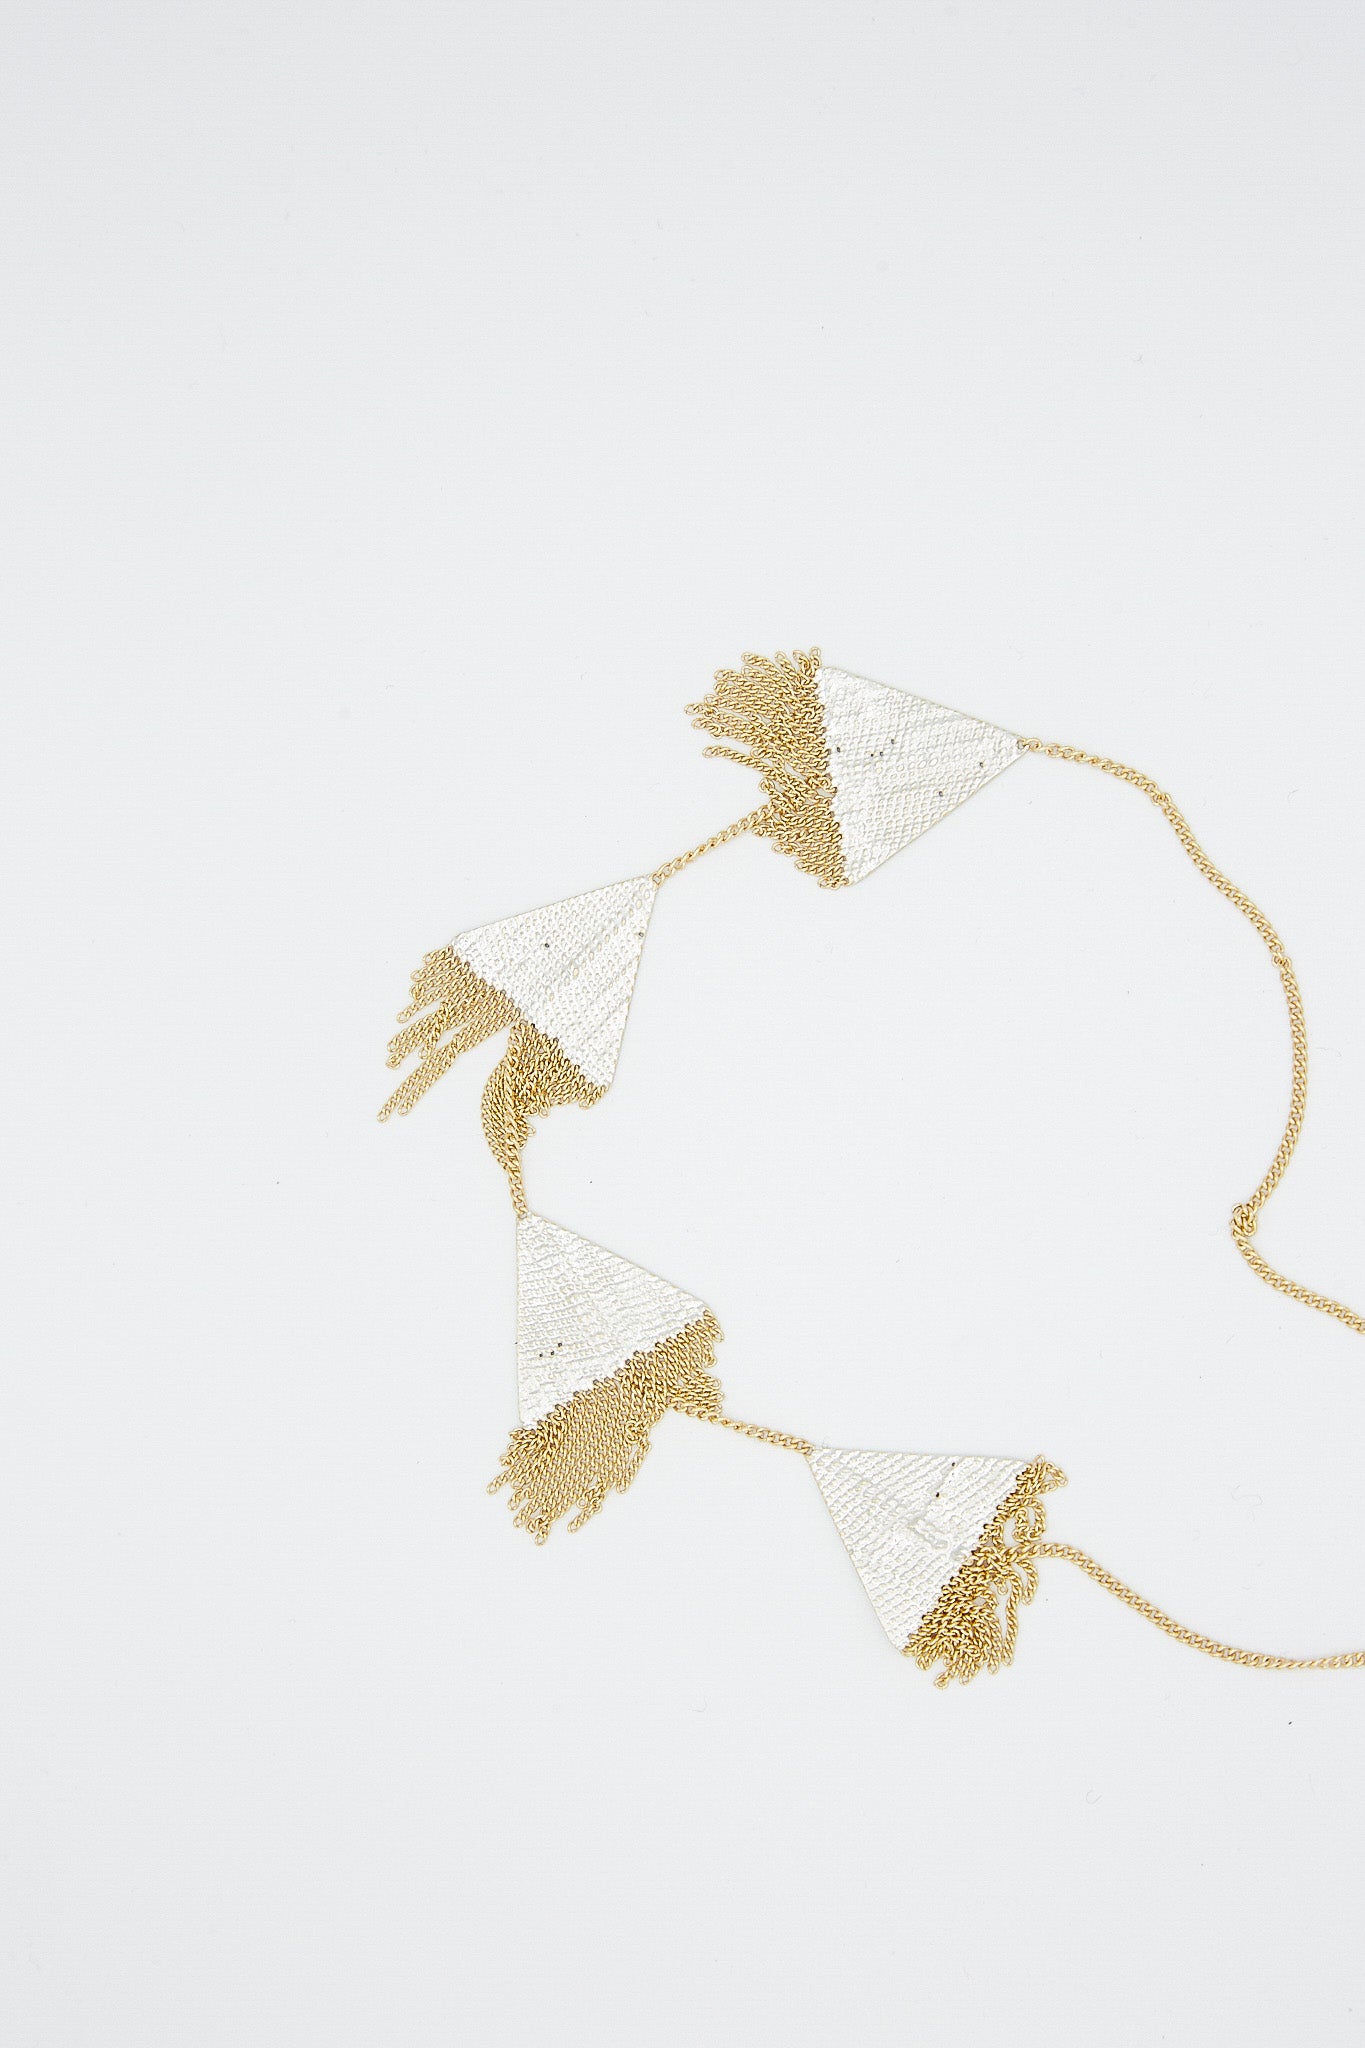 A Hannah Keefe Triangle Necklace in Brass Chain and Silver Solder with geometric forms and tassels.